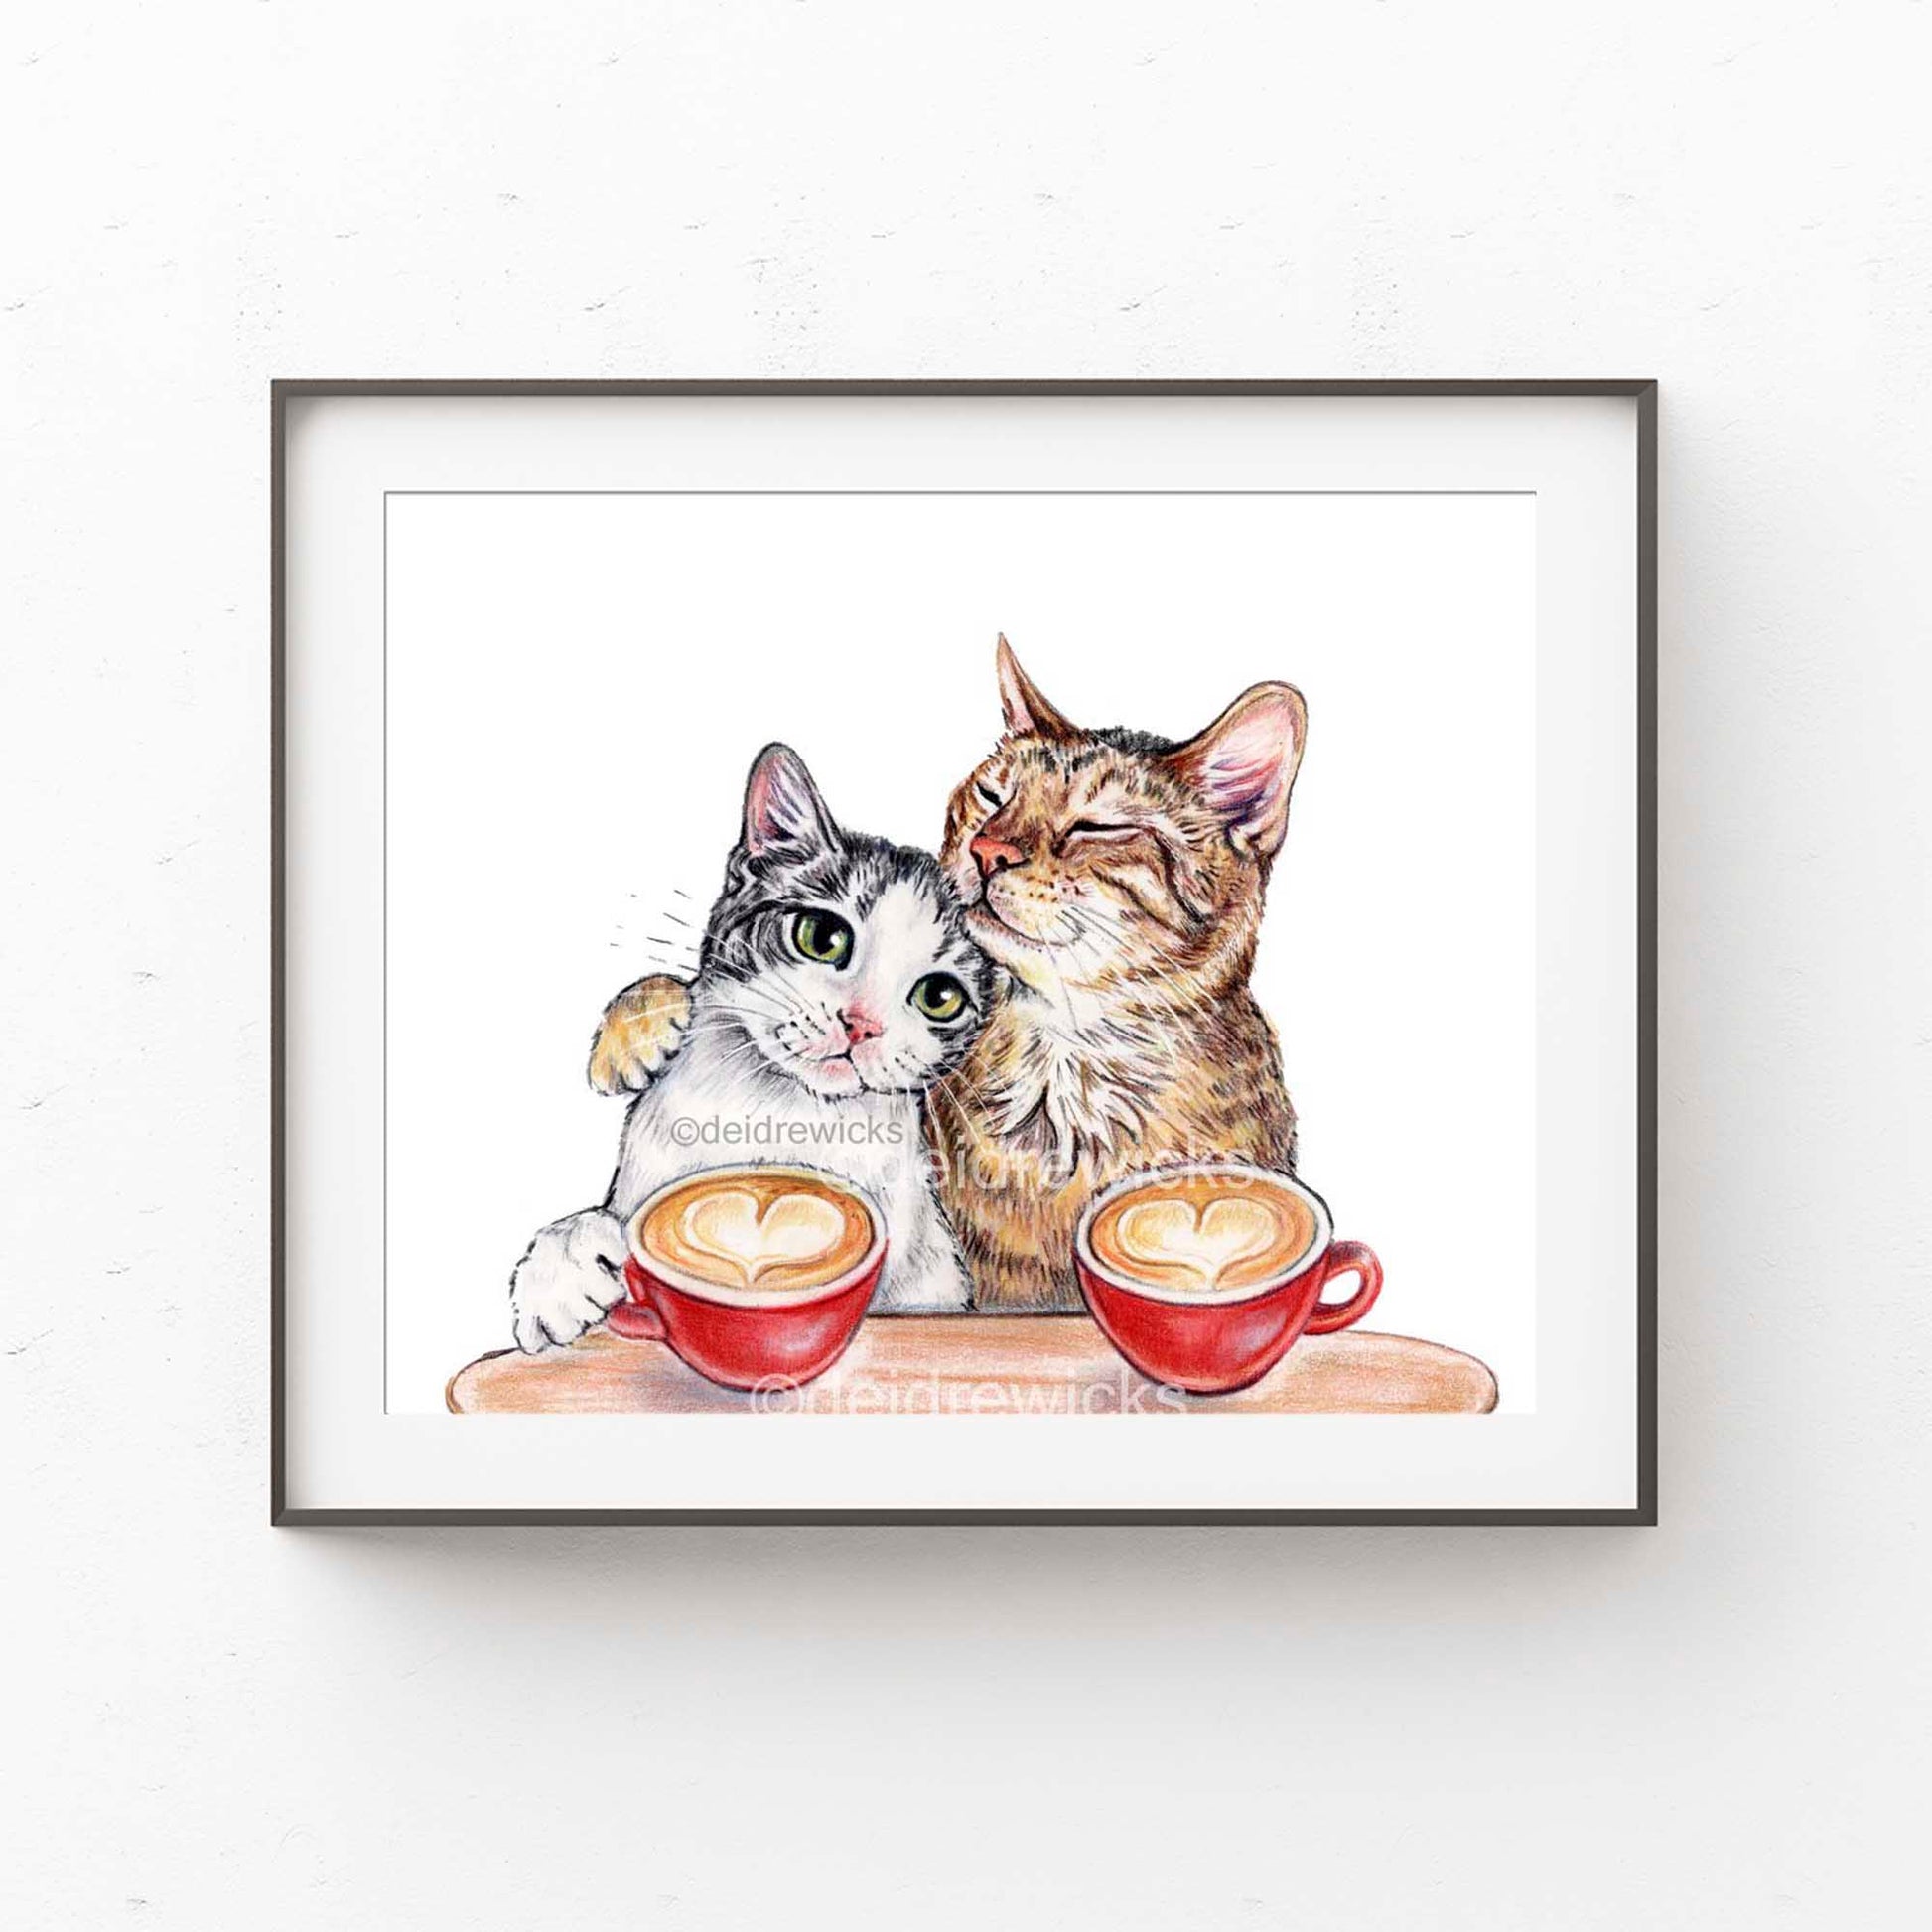 Suggested framing for a cat print by Water In My Print